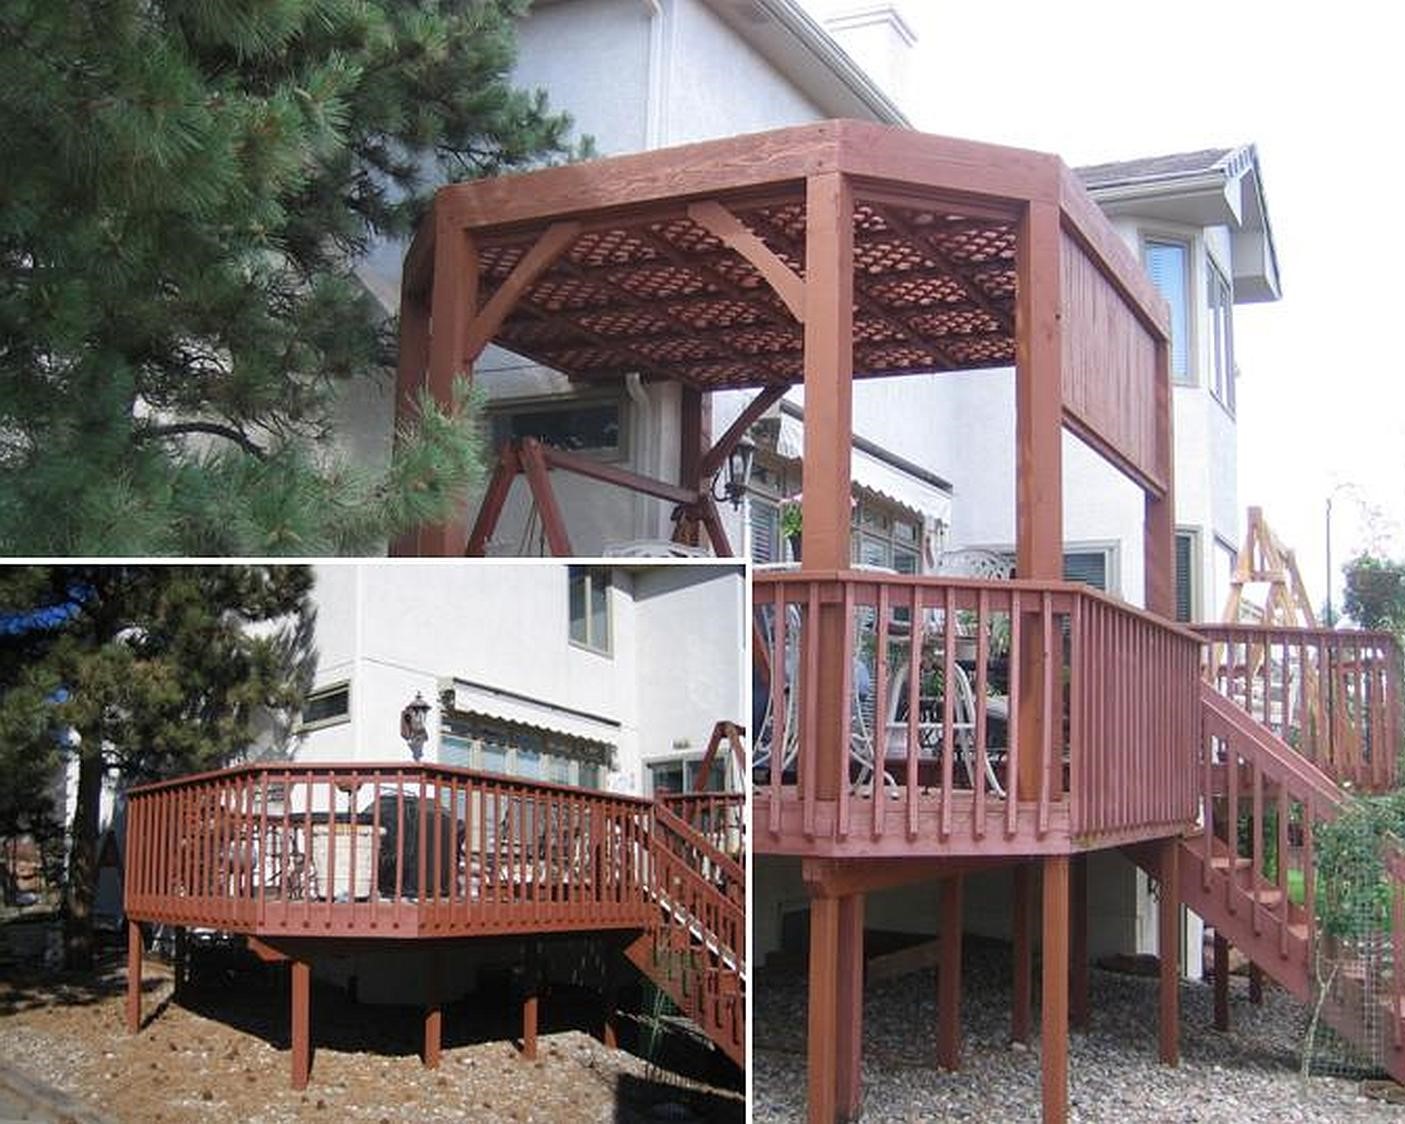 Cedar pergola that has been added to a redwood deck. The picture shows the deck before and after.